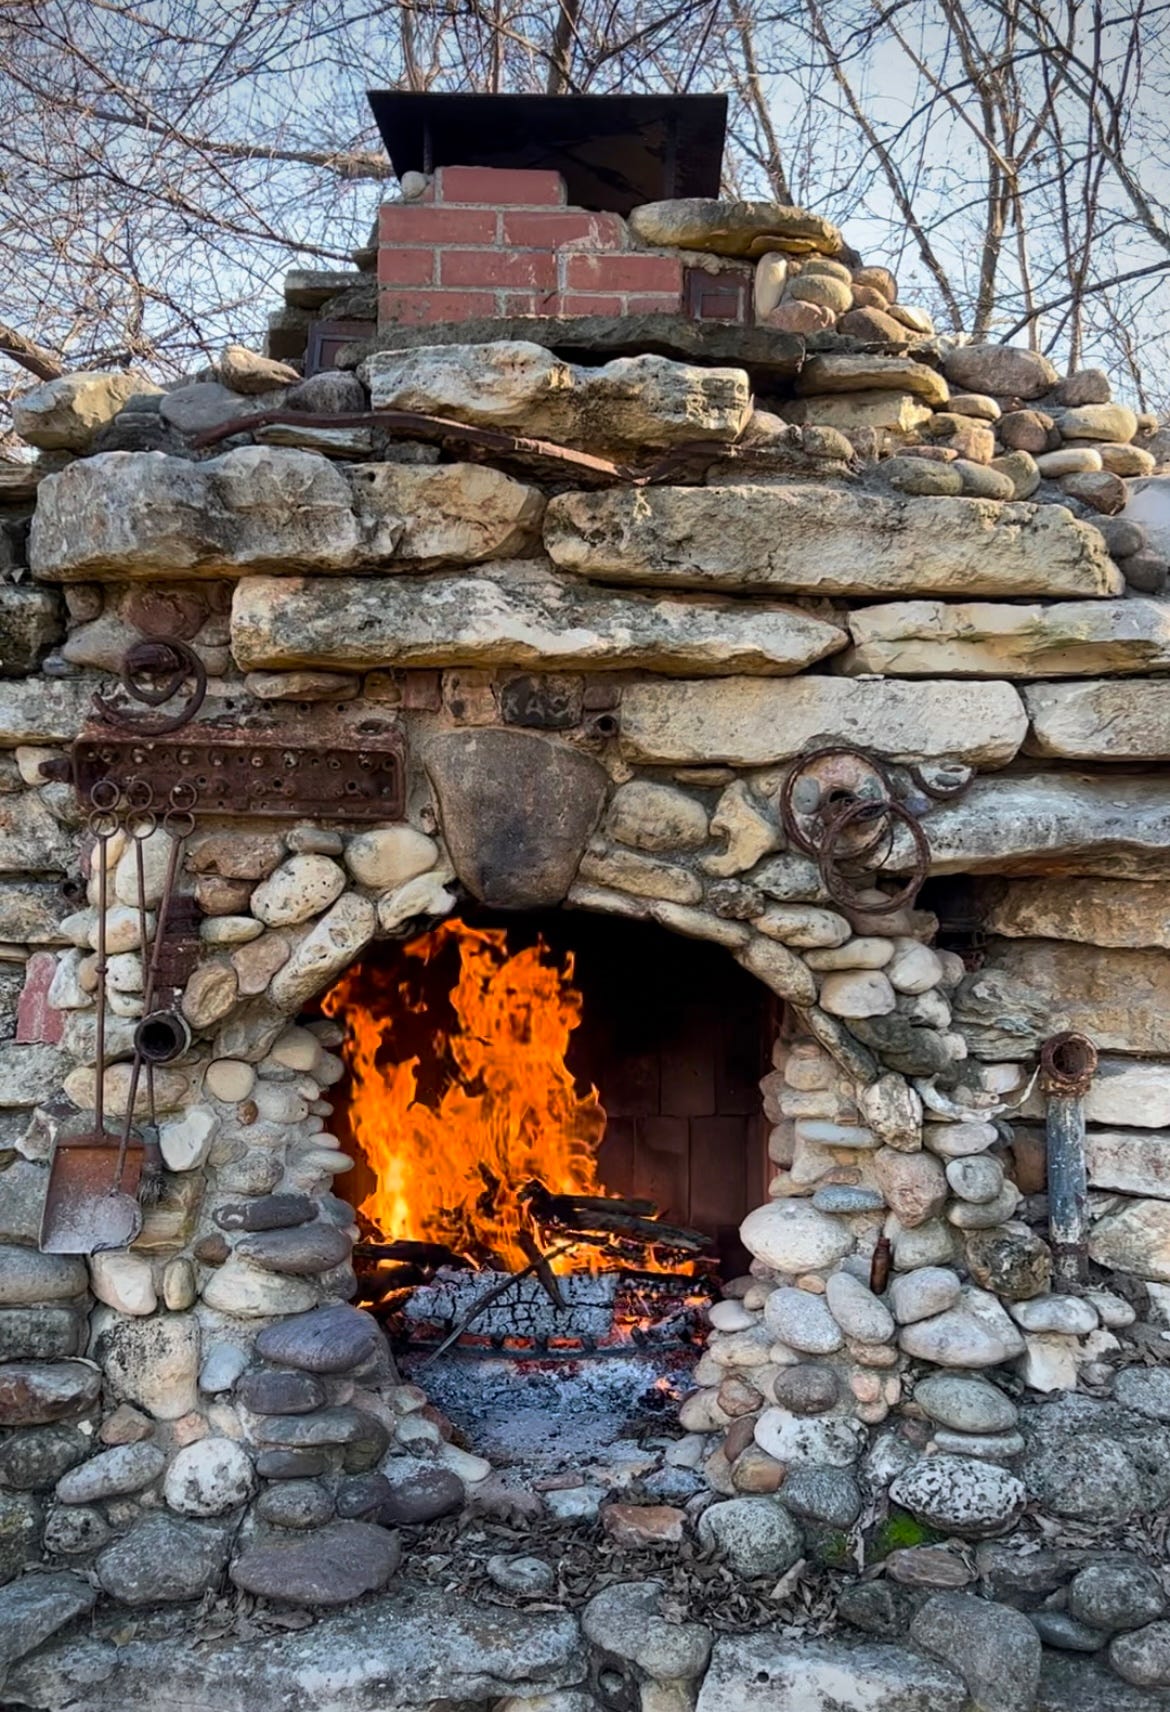 Color photo of outdoor fireplace made from concrete debris, metal trash, and river rock, with a blazing fire on